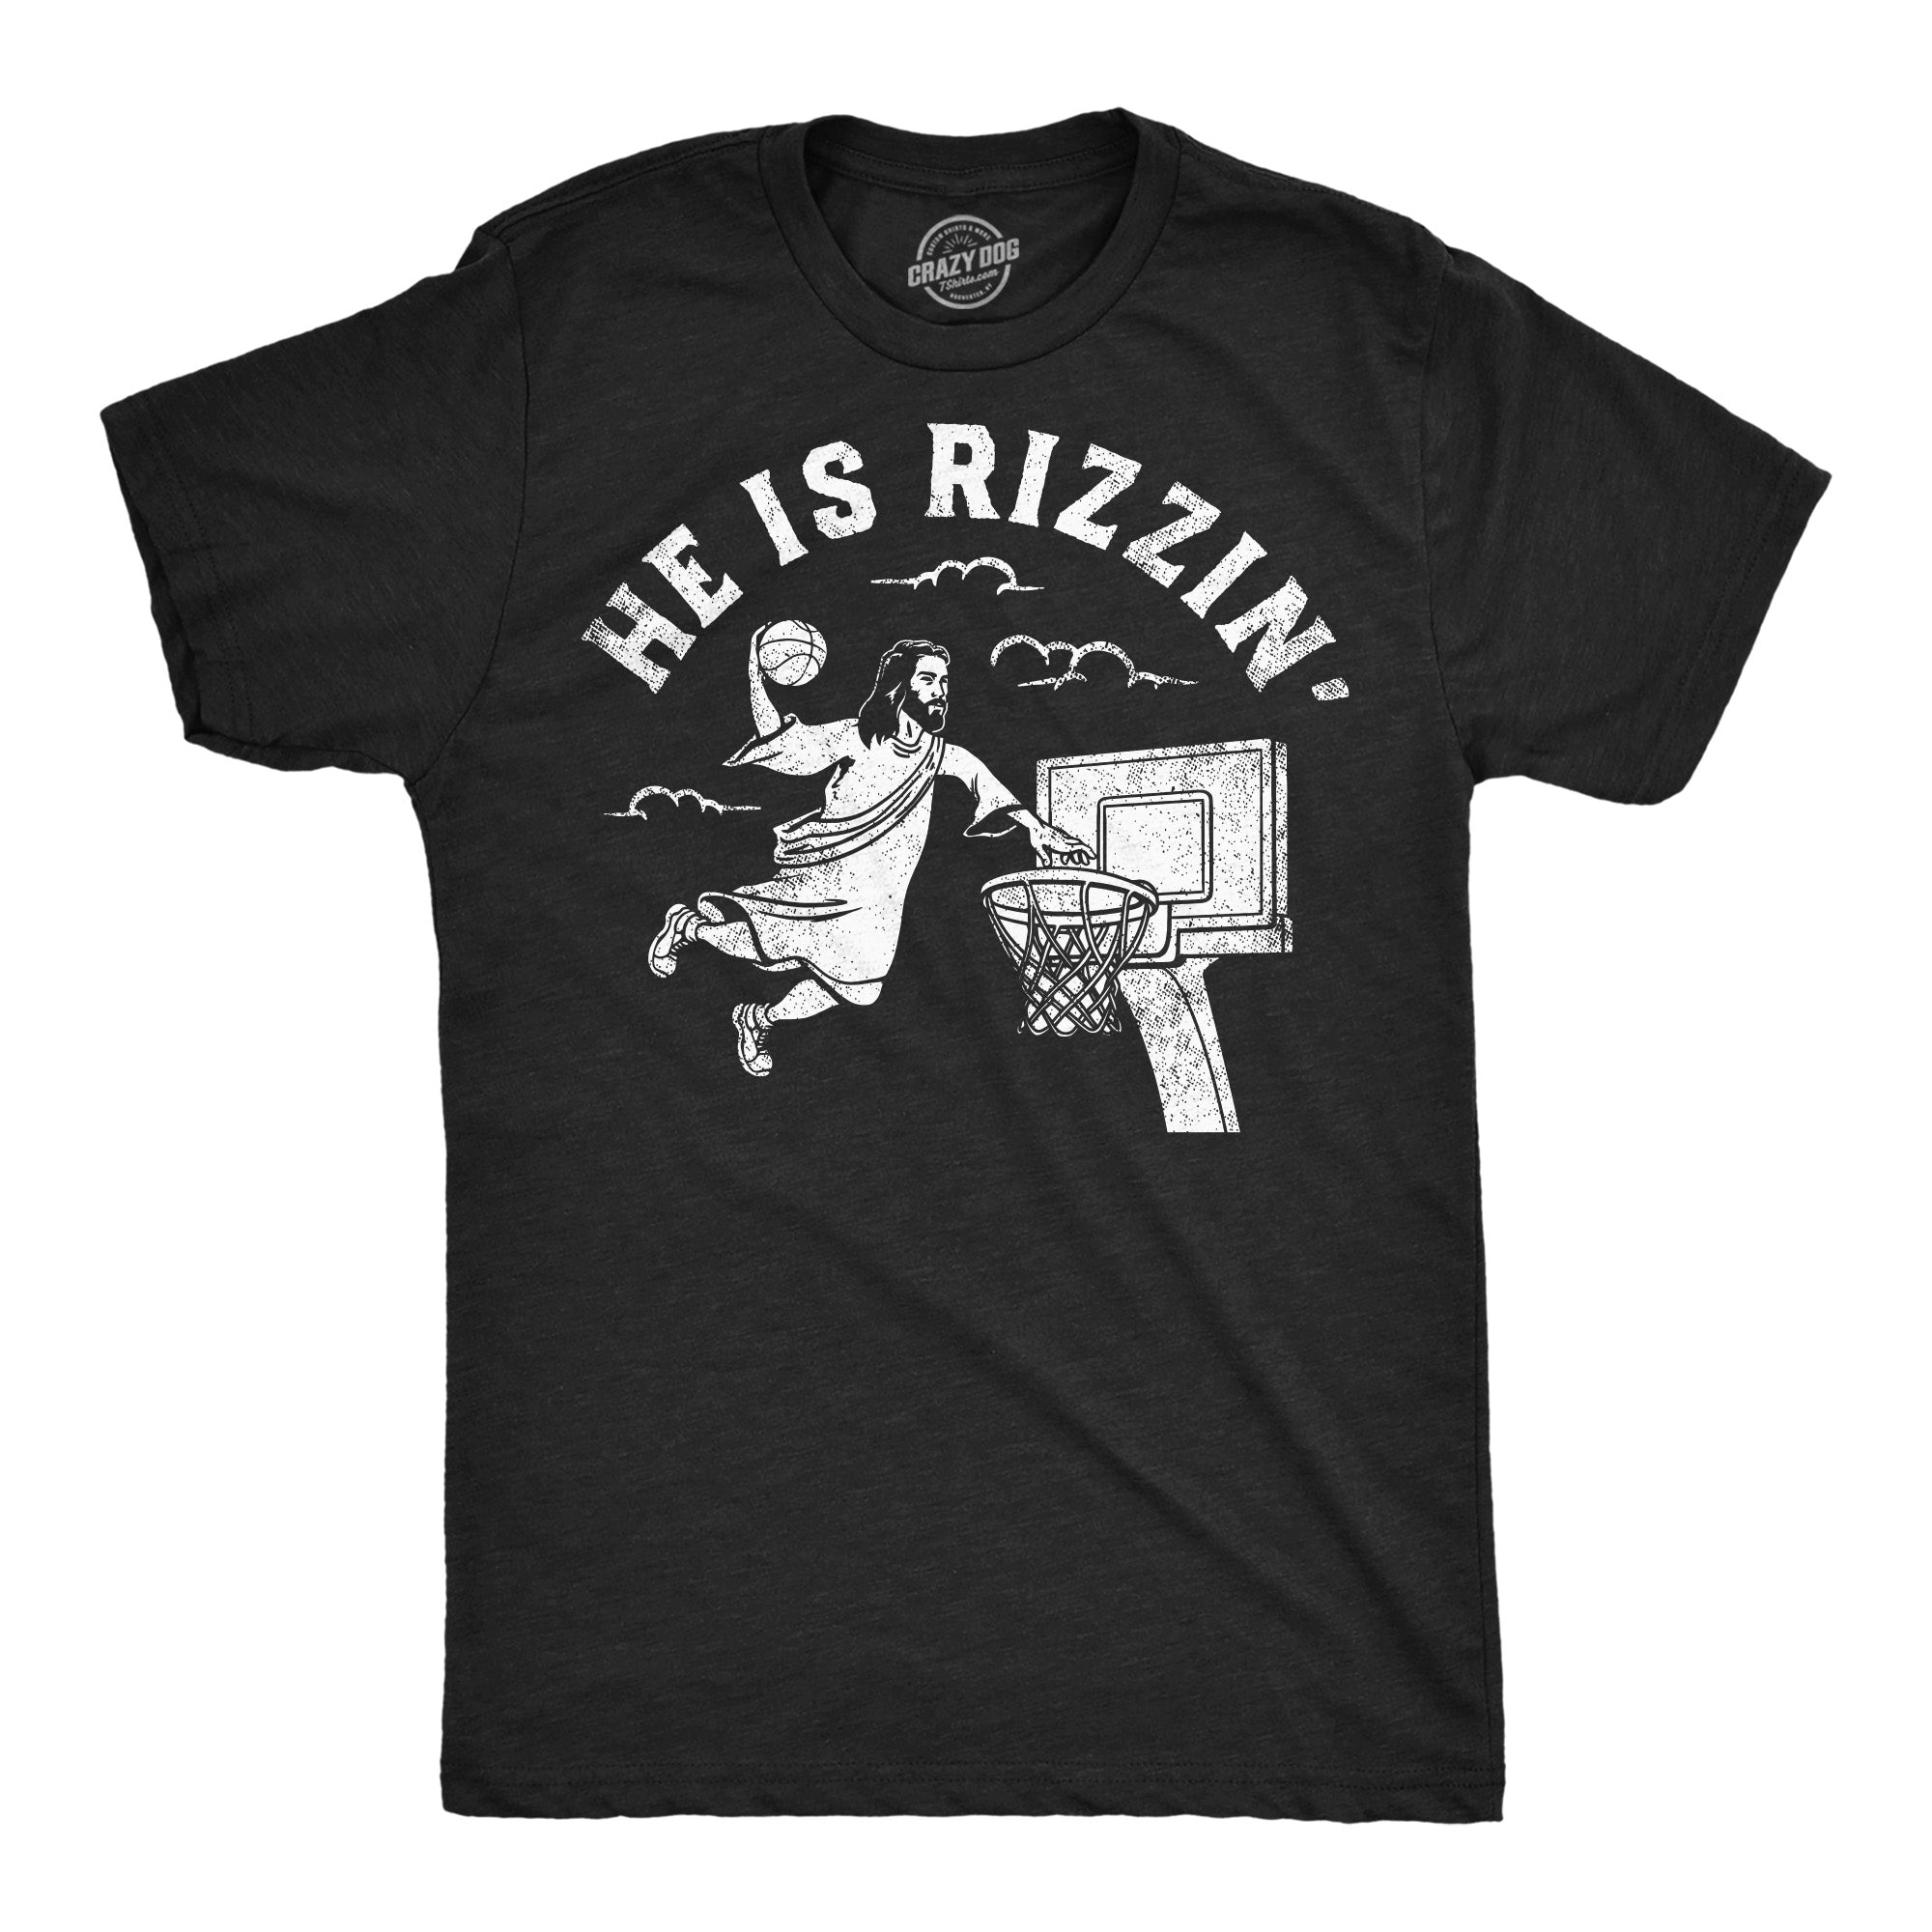 Funny Heather Black - He Is Rizzin He Is Rizzin Mens T Shirt Nerdy Easter Religion sarcastic Tee